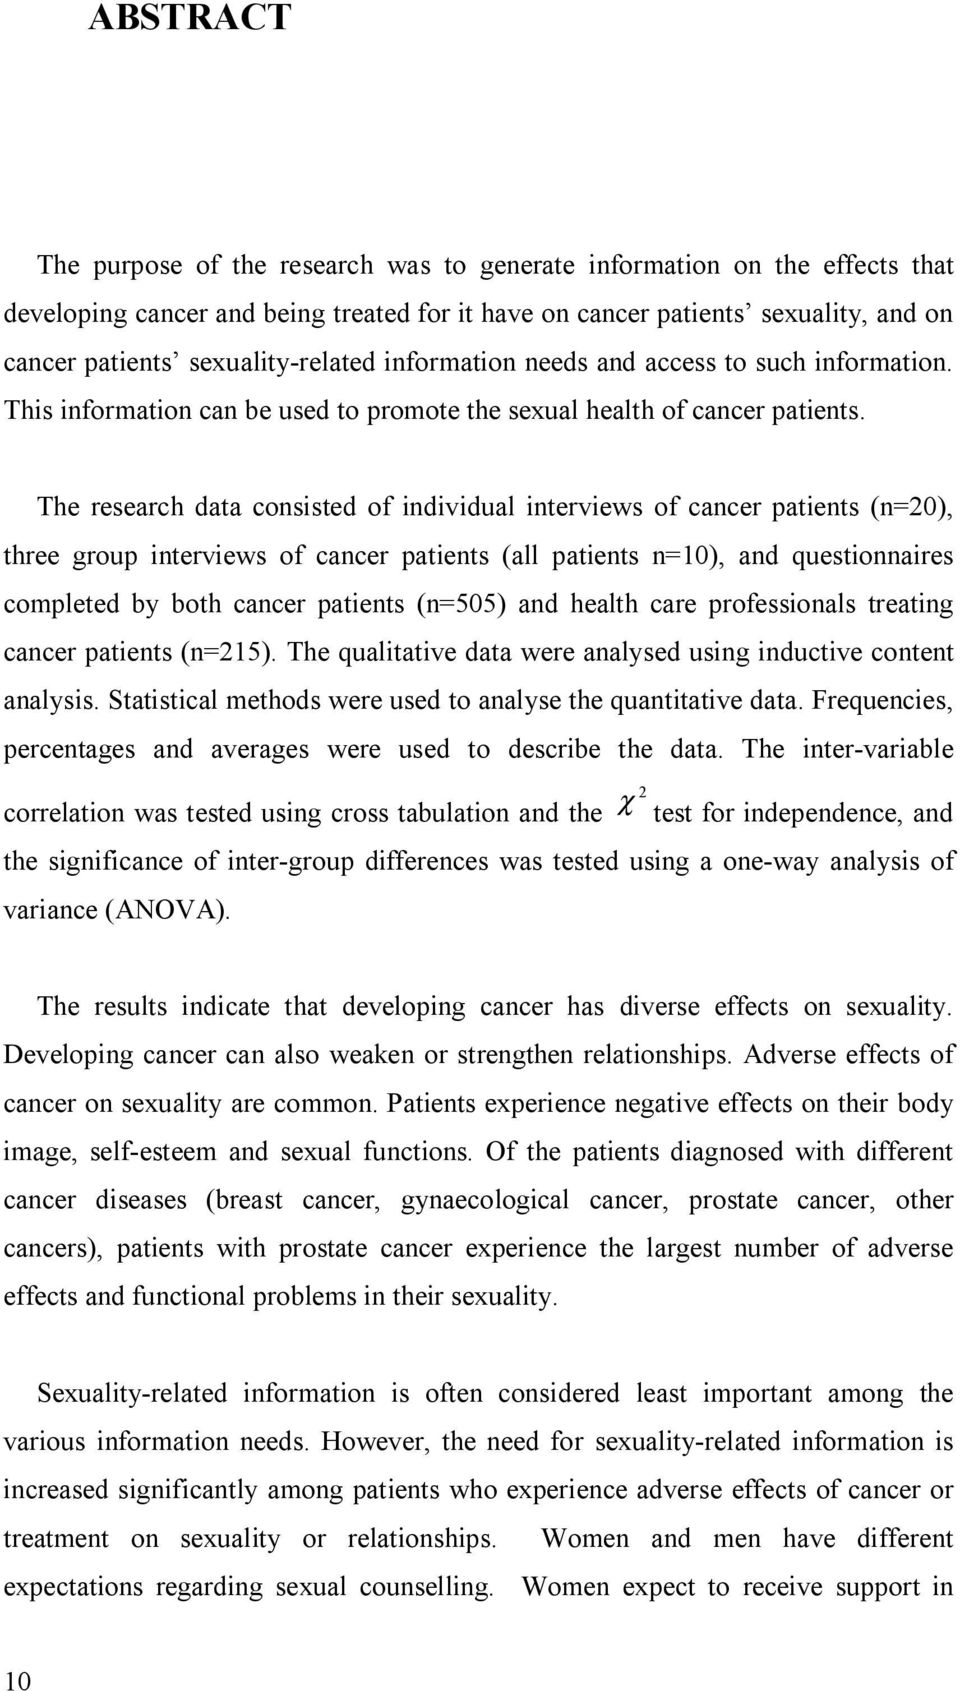 The research data consisted of individual interviews of cancer patients (n=20), three group interviews of cancer patients (all patients n=10), and questionnaires completed by both cancer patients